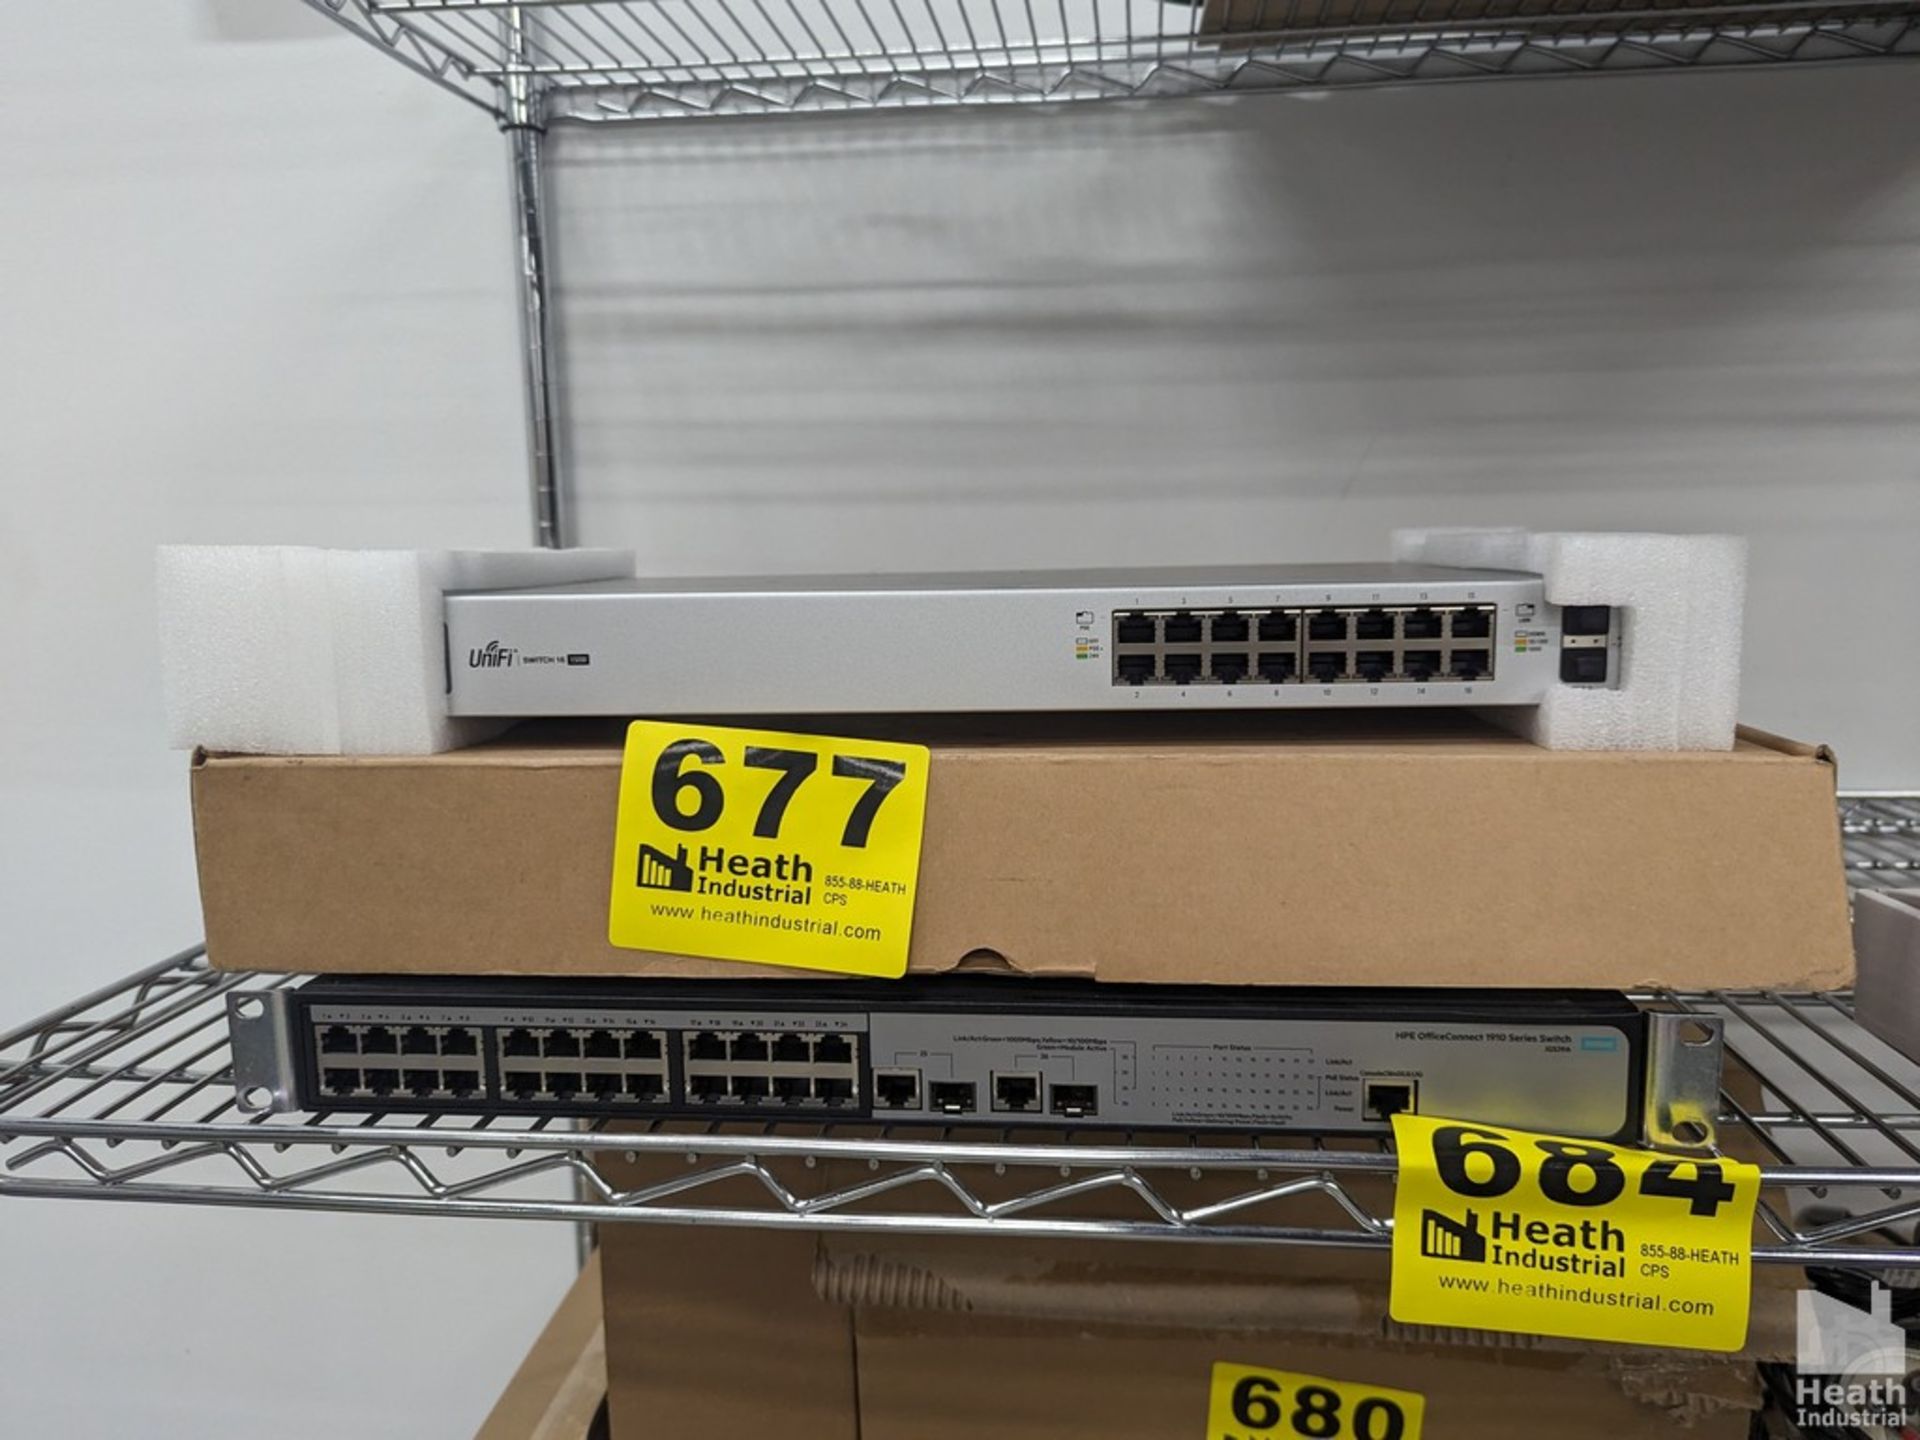 HPE OFFICE CONNECT 1910 24 PORT & UNIFI 16 PORT SWITCHES